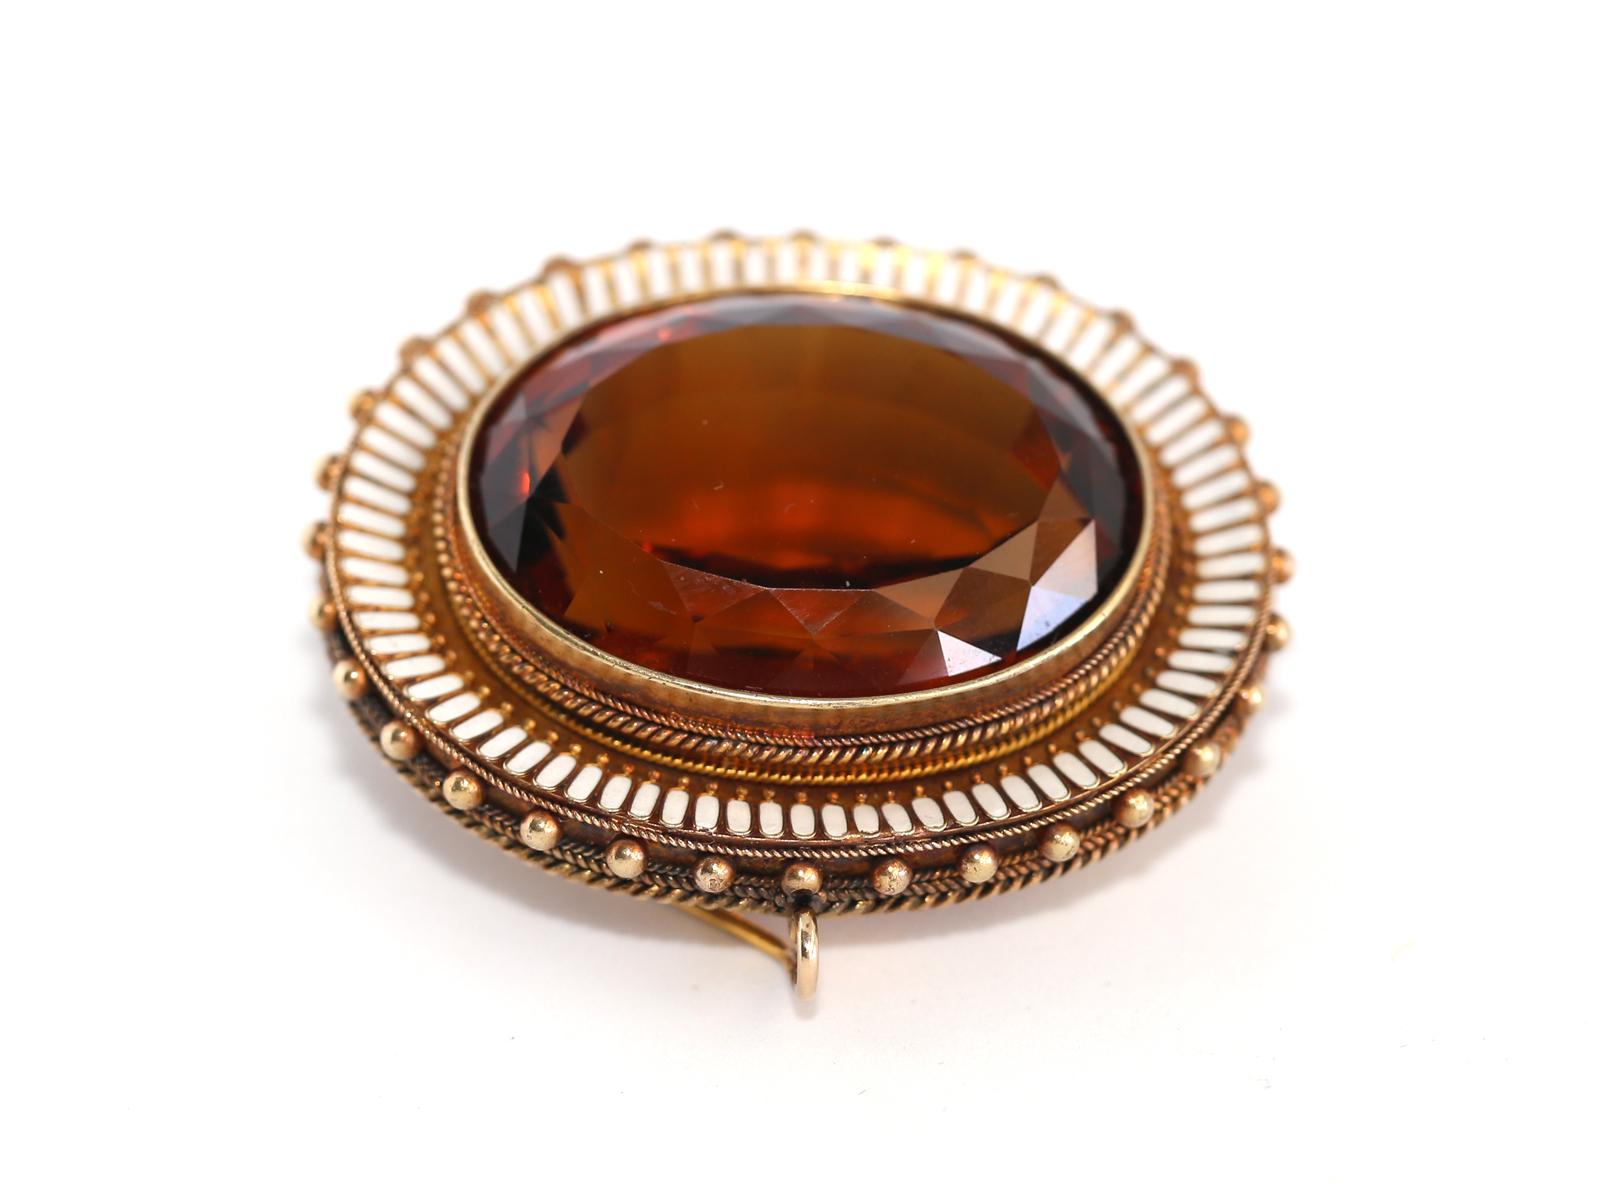 Massive Citrine White Enamel Pendant Brooch of Bidermier Epoc.
The superb quality of craftsmanship. White Enamel is flawless. 

The pendant/brooch is of the age where the components may be a combination of solid gold, rolled gold, and gold wash. 
it